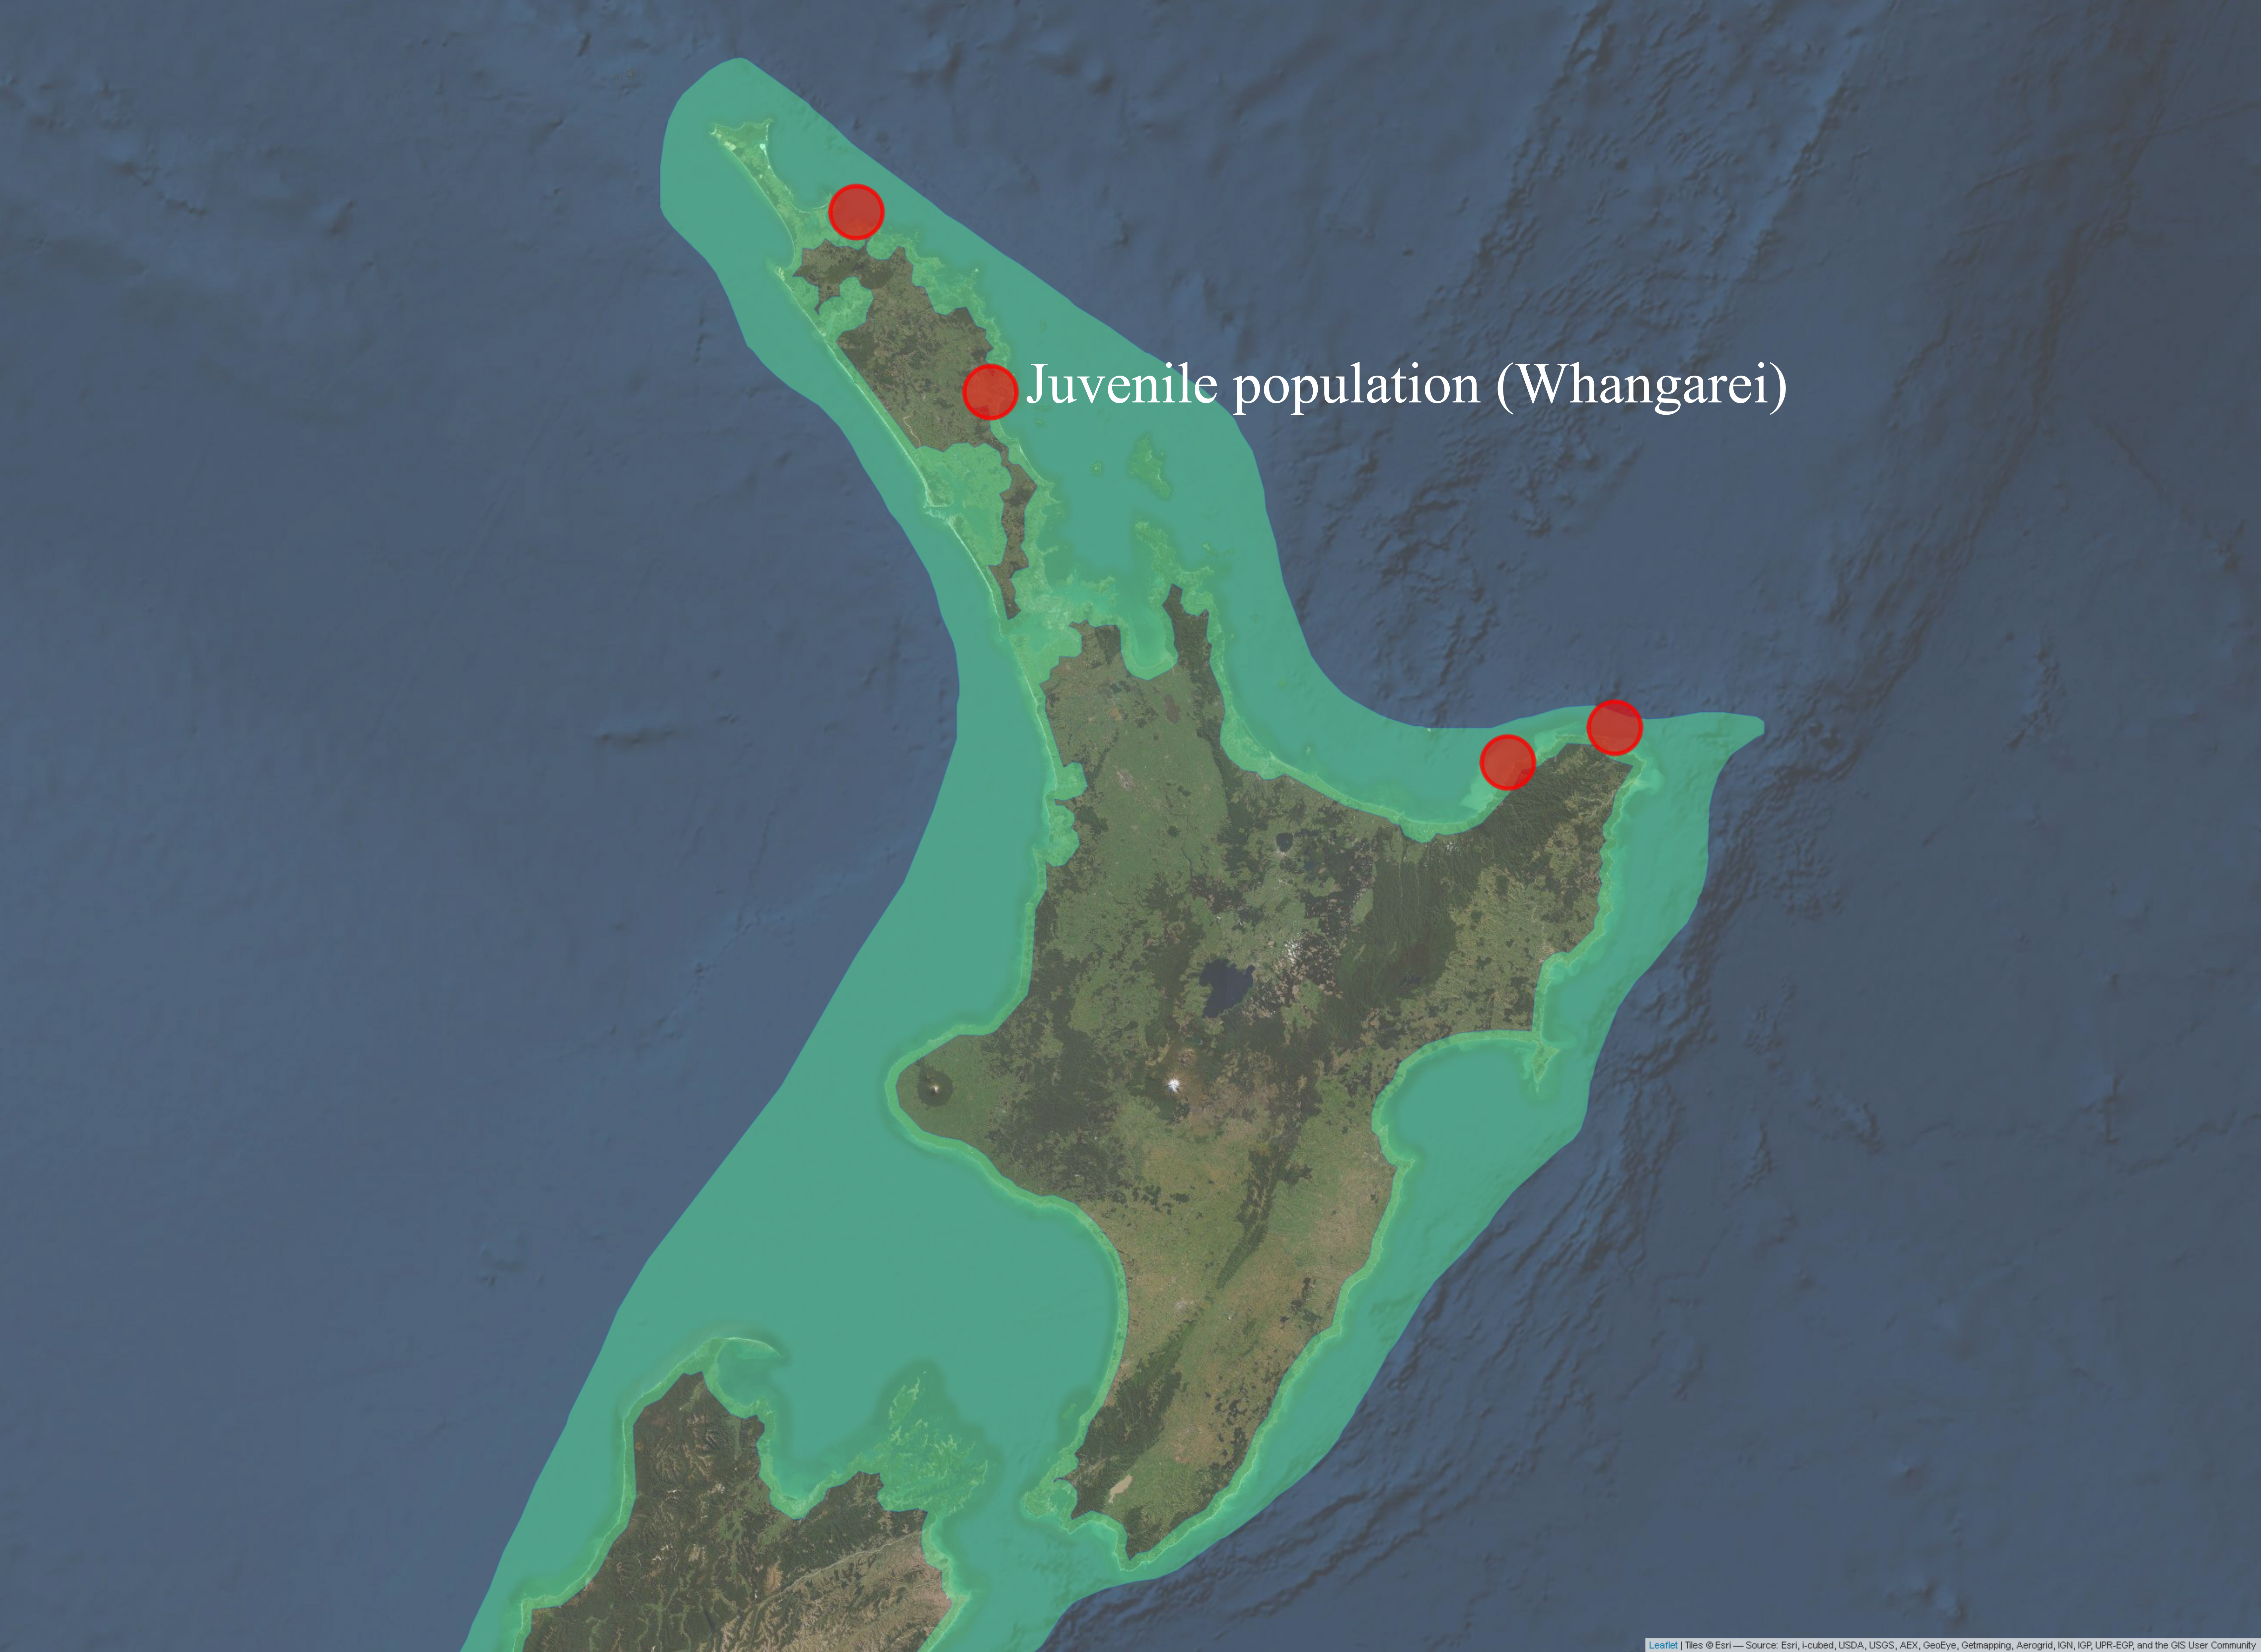 Sampling locations of adult *P. georgianus* with the same haplotypes as juveniles caught in Whangarei (top) or haplotypes with one (middle) or two (bottom) single nucleotide differences.